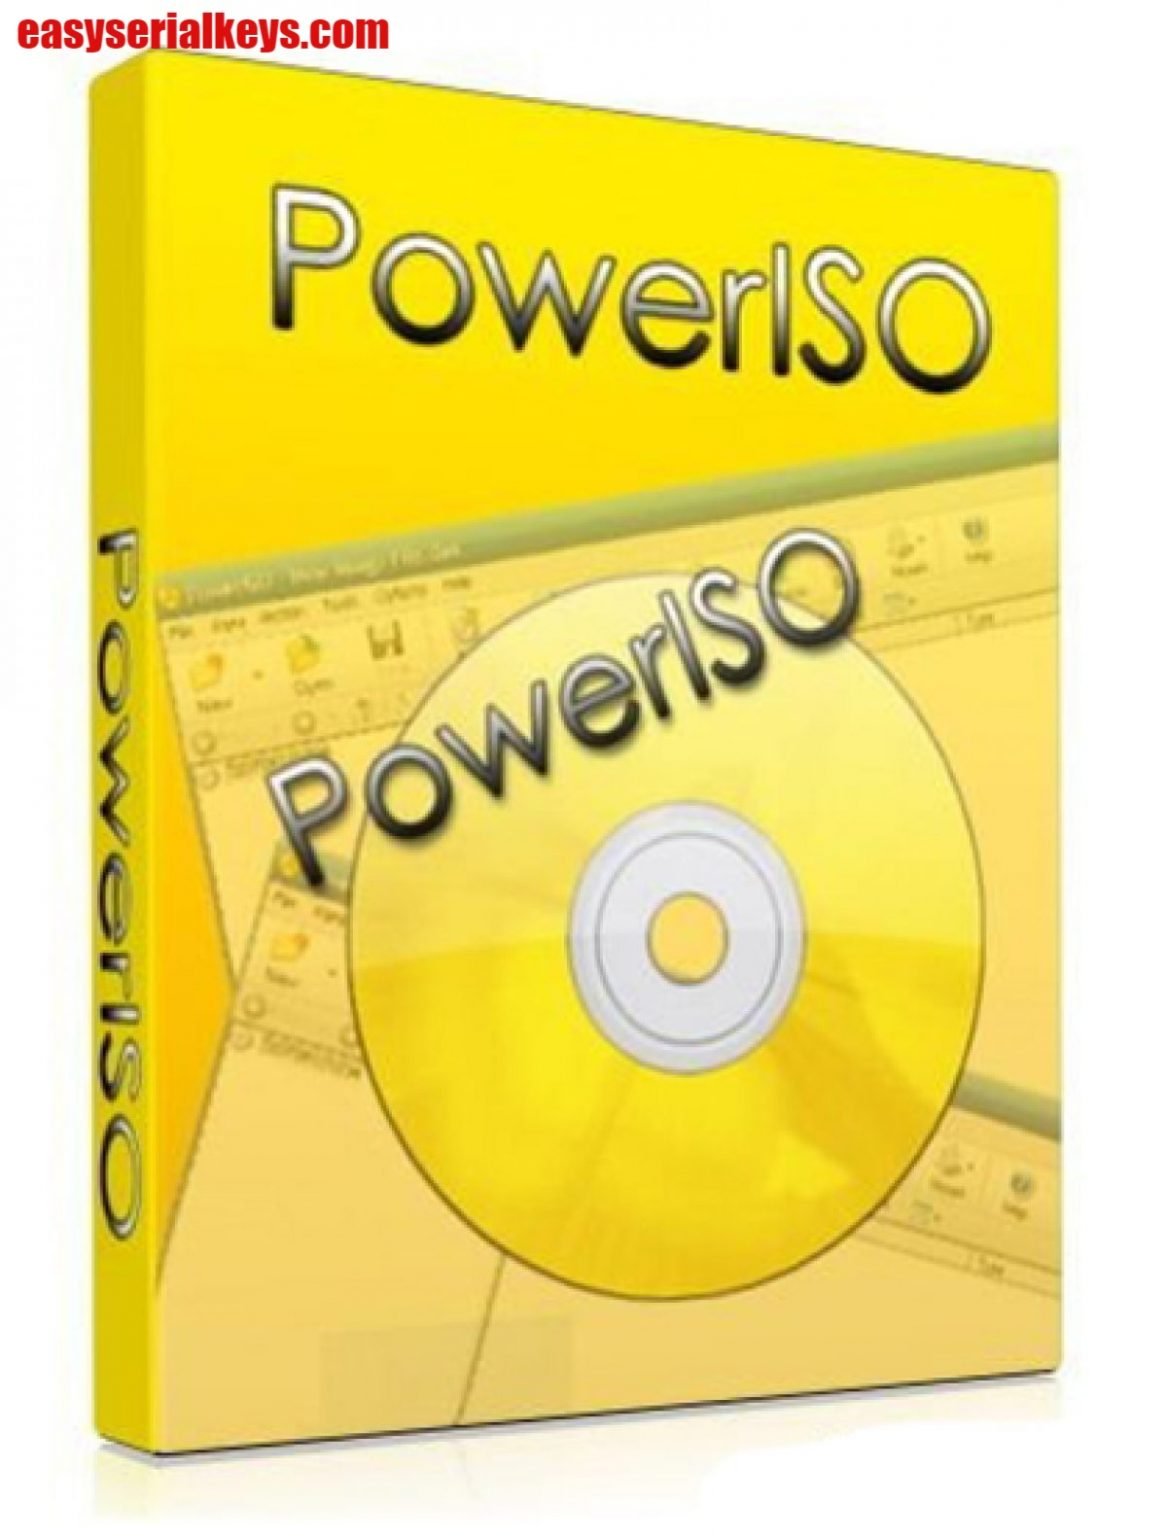 torrent download poweriso with serial